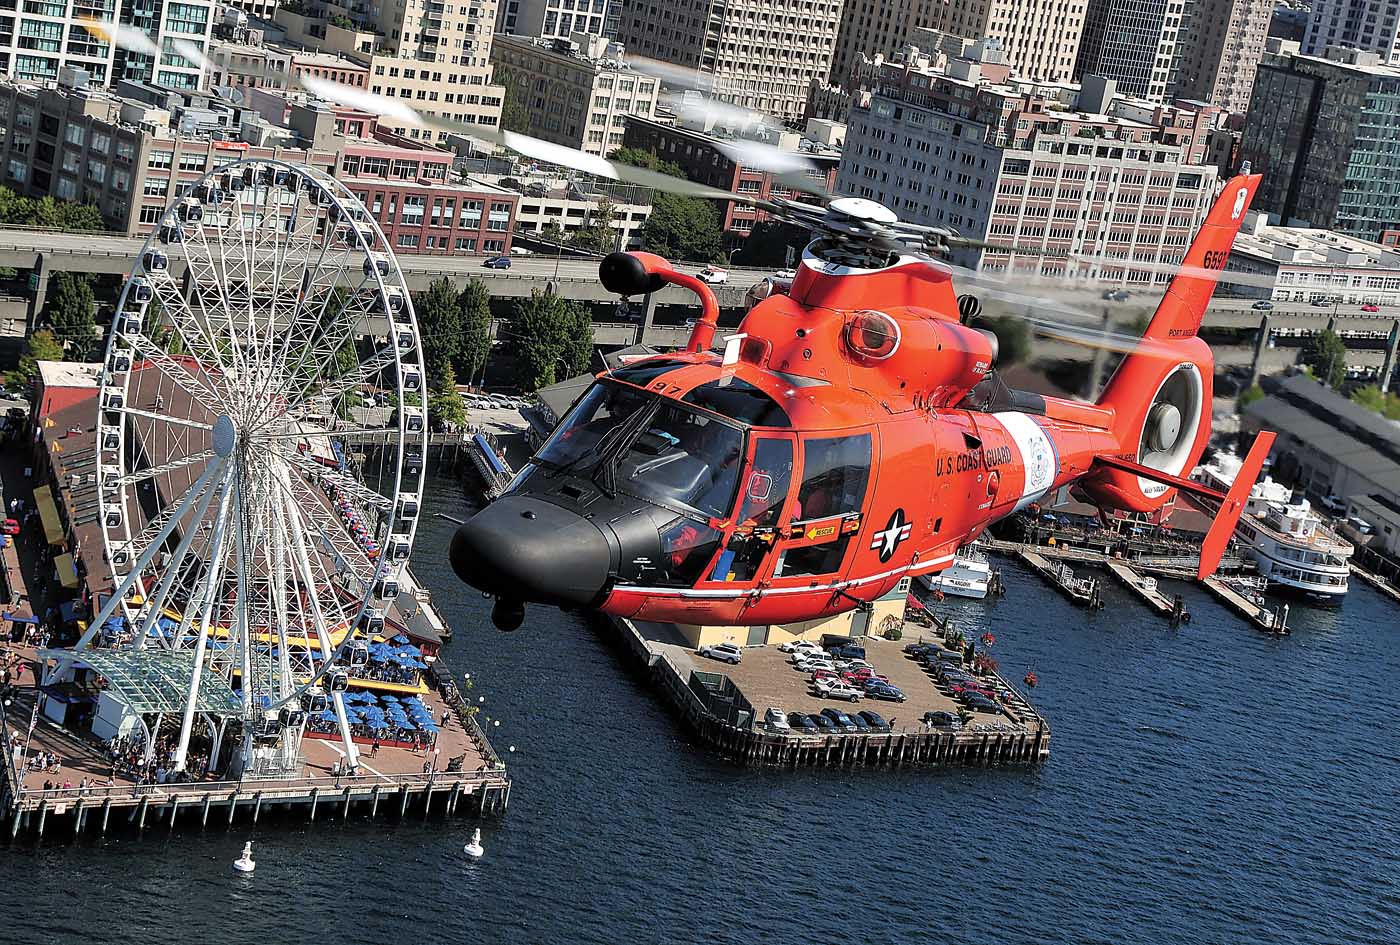 The operational area for U.S. Coast Guard Air Station Port Angeles includes Seattle’s waterfront and harbor facilities. Here, an Airbus MH-65D flies past Seattle’s Bay Pavilion. Skip Robinson Photo